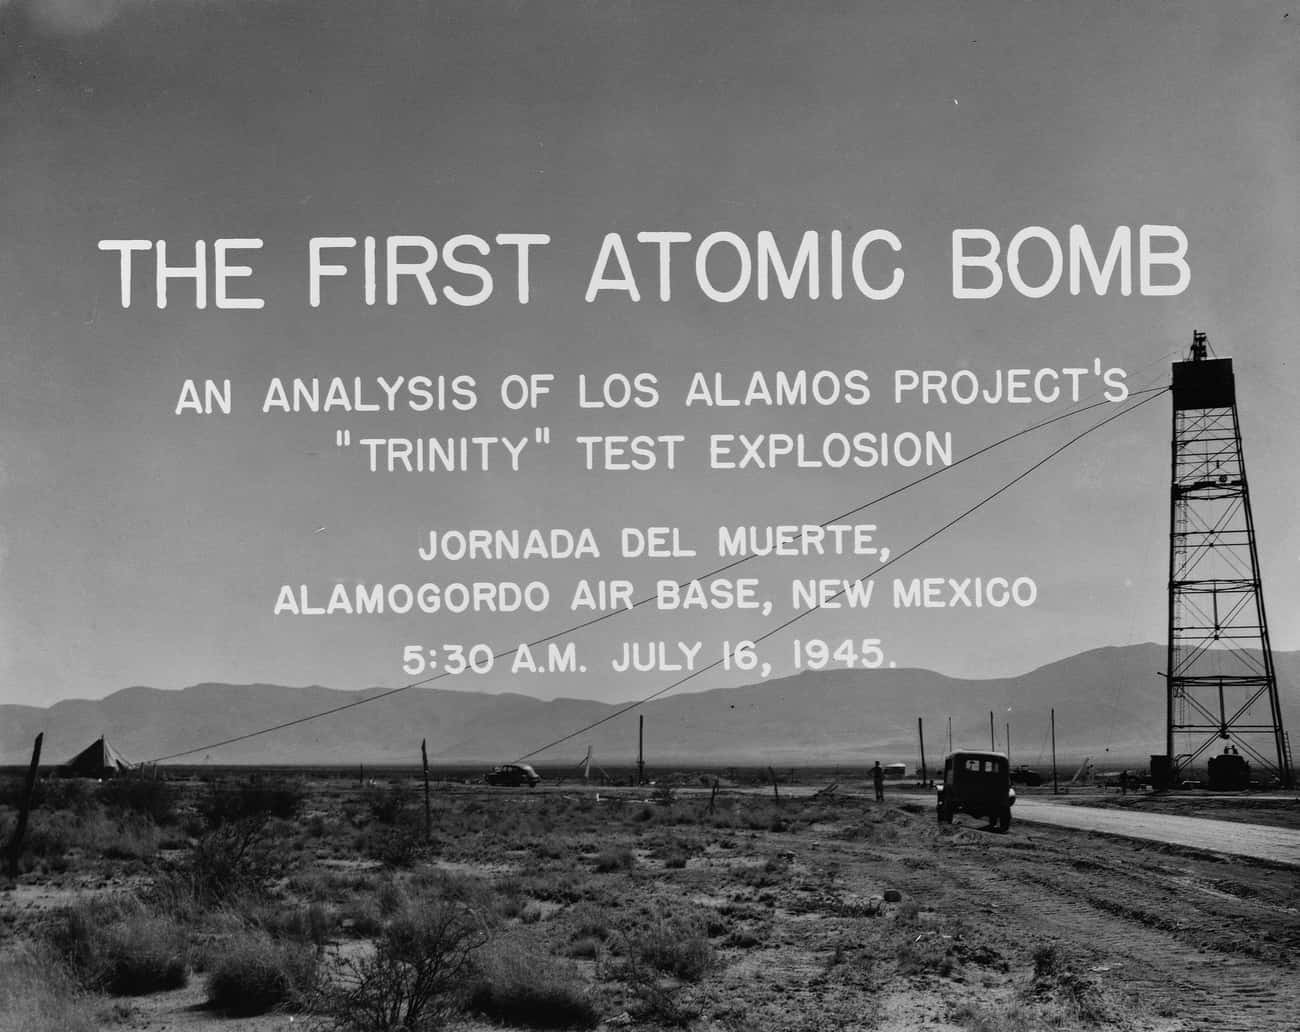 On July 16, 1945, The Manhattan Project Was Launched In New Mexico